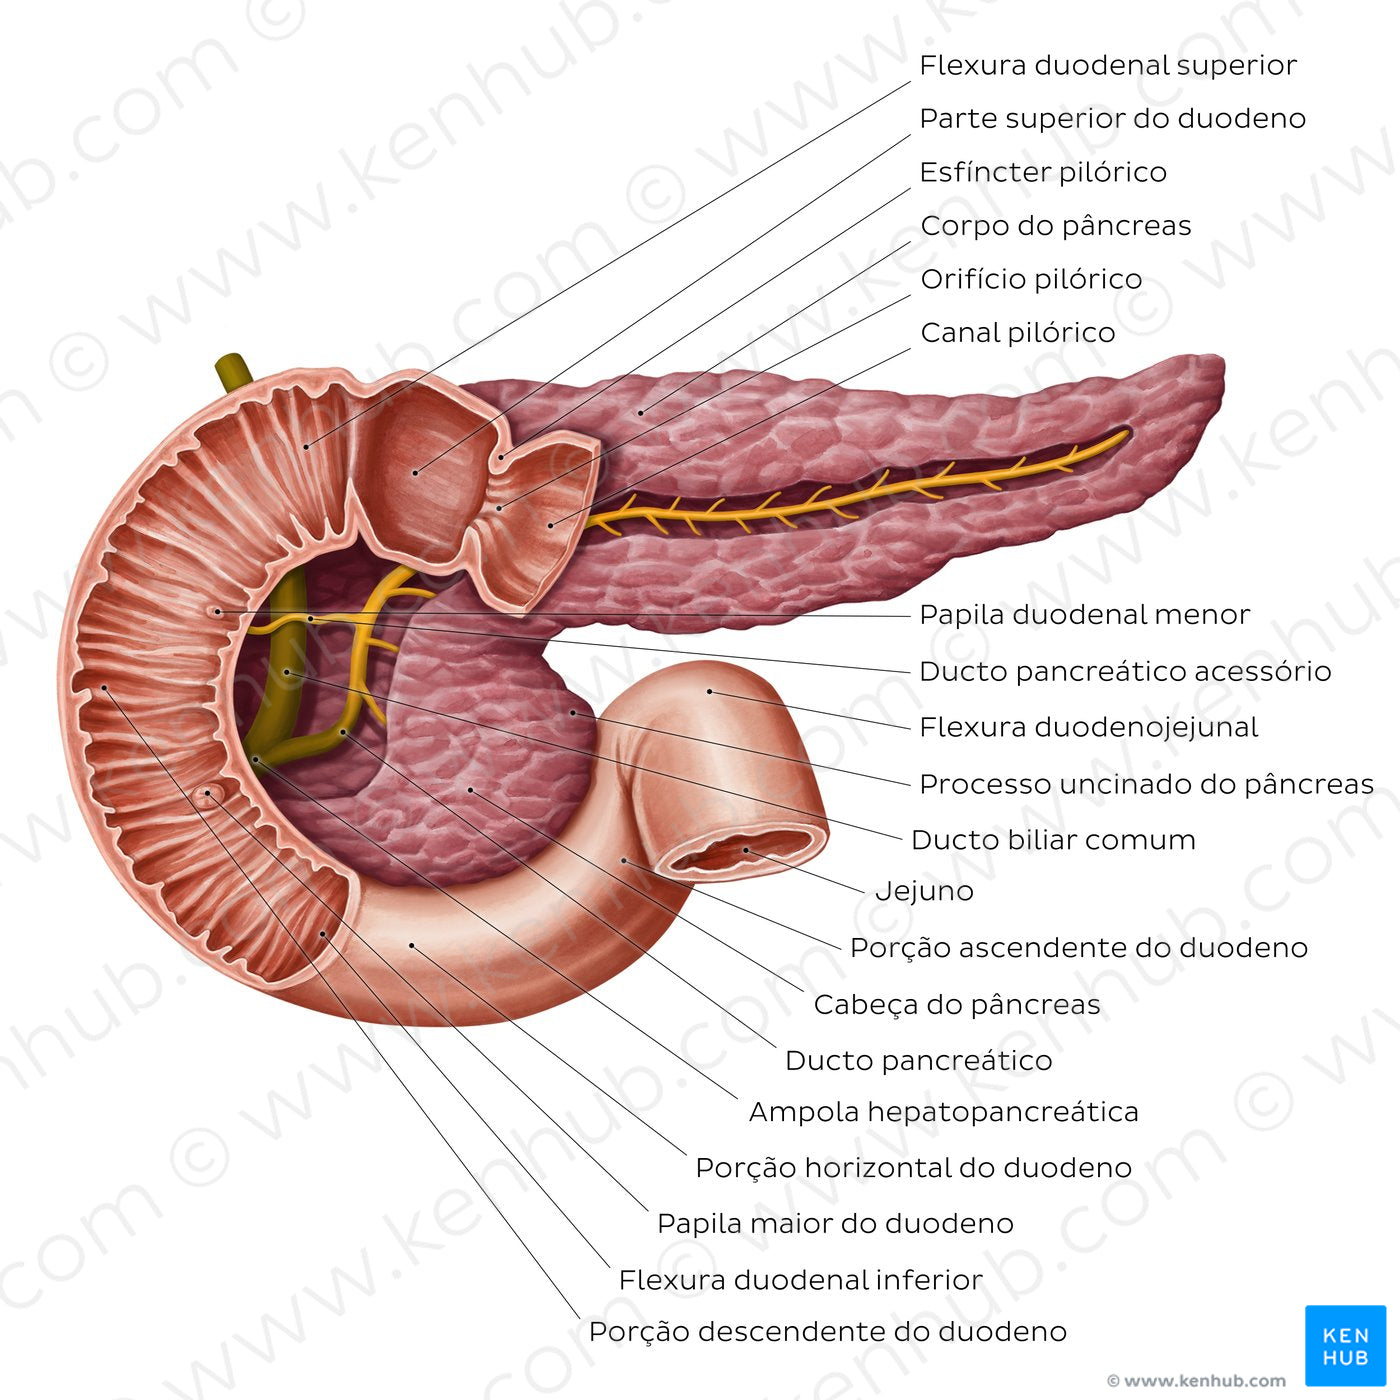 Pancreatic duct system (Portuguese)